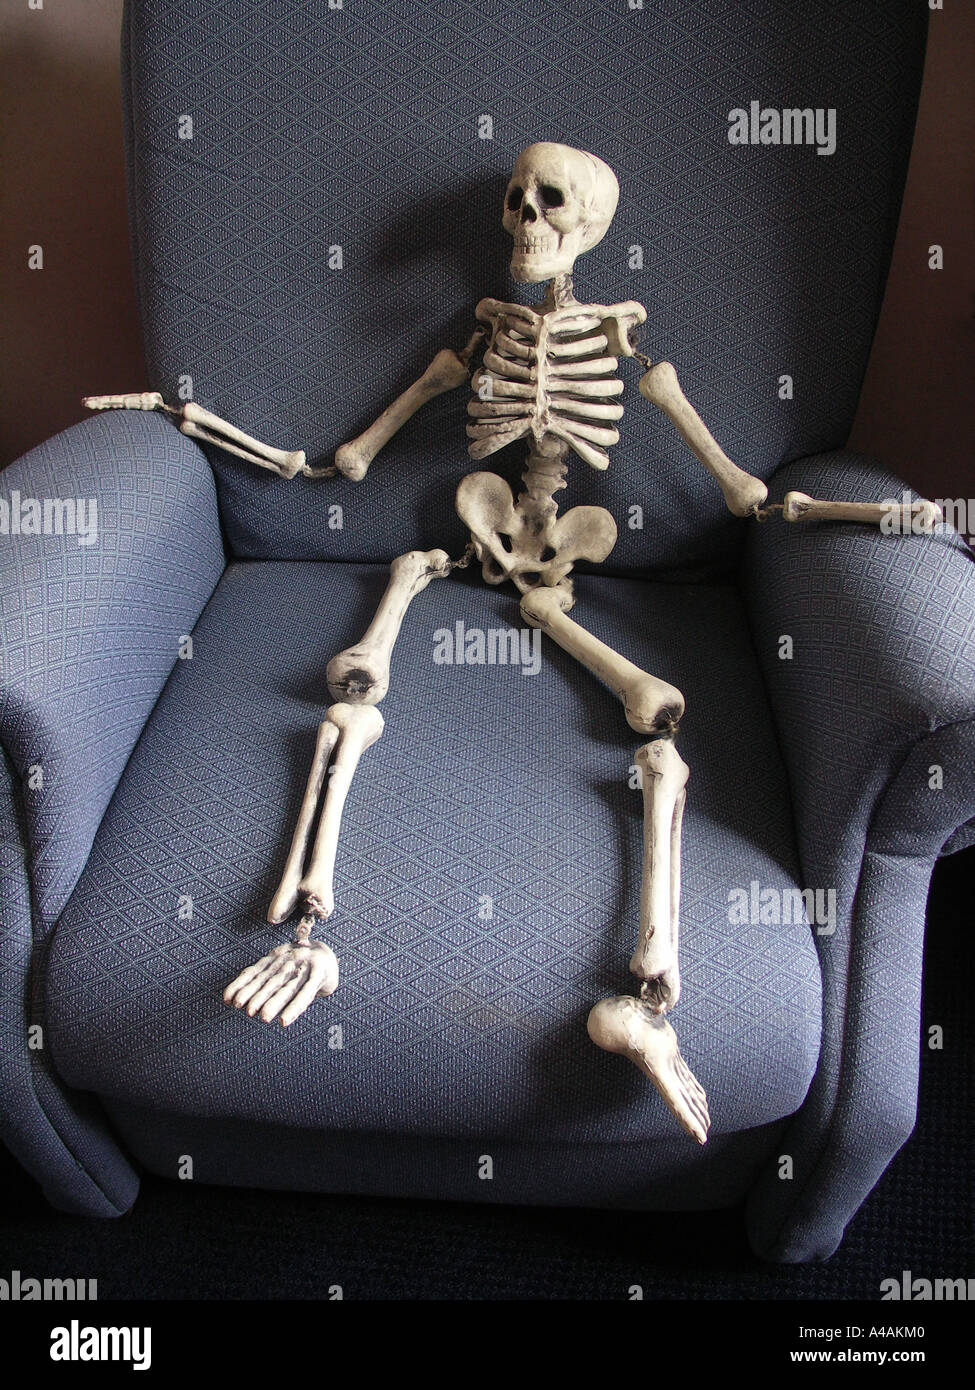 Bored Stiff Skeleton Resting In Lounge Chair Stock Photo 6279295